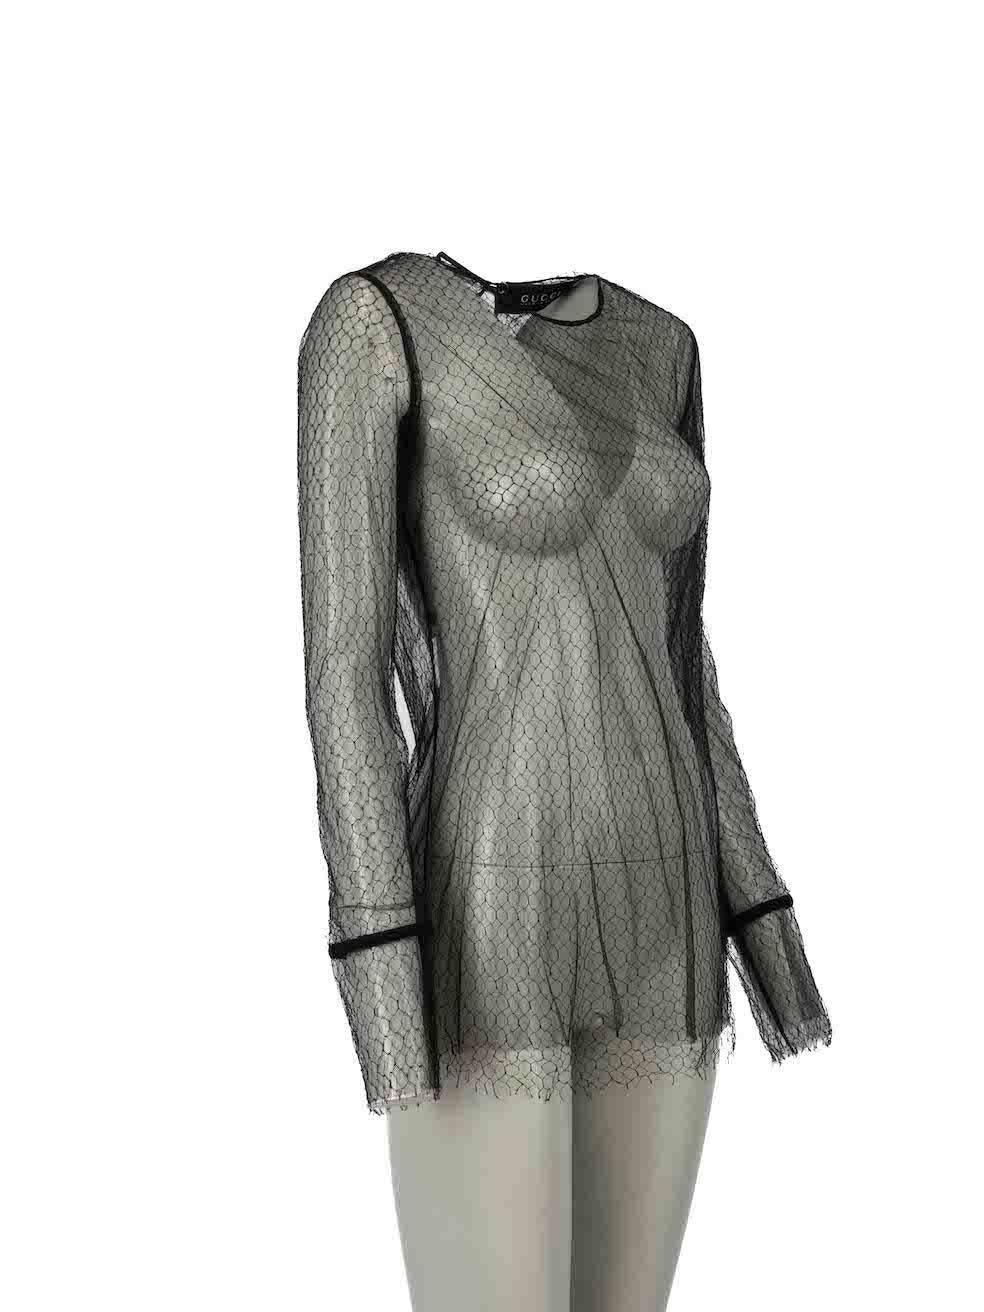 CONDITION is Very good. Minimal wear to top is evident. Minimal wear to mesh with some minor plucks and fraying of the weave seen throughout on this used Gucci designer resale item.
 
Details
Black
Synthetic
Top
See-through
Long sleeves
Net and